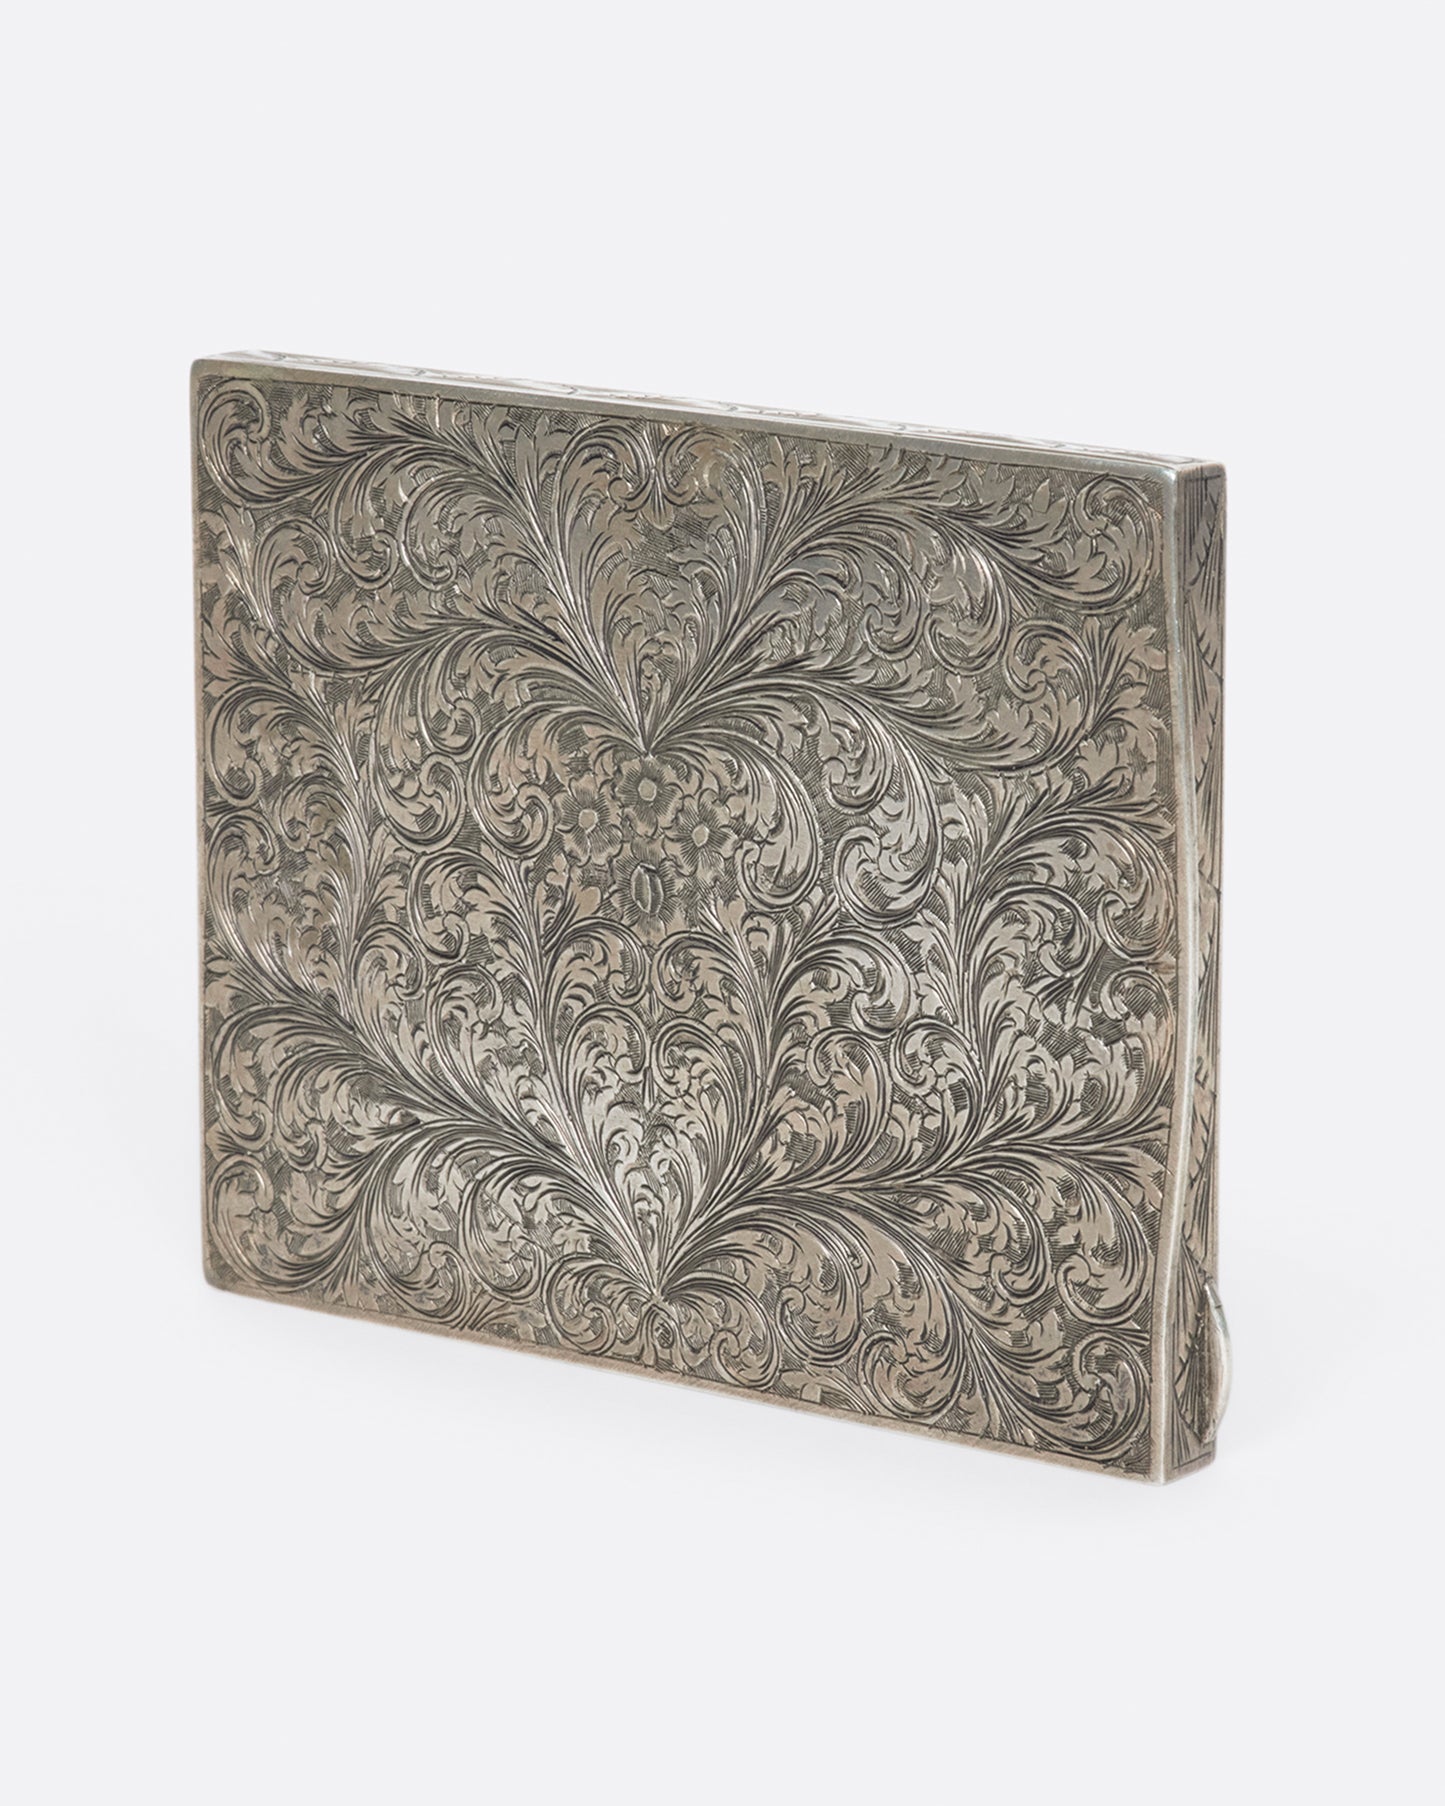 This slim, floral box is perfect for stashing joints, cigarettes, credit cards; you name it.